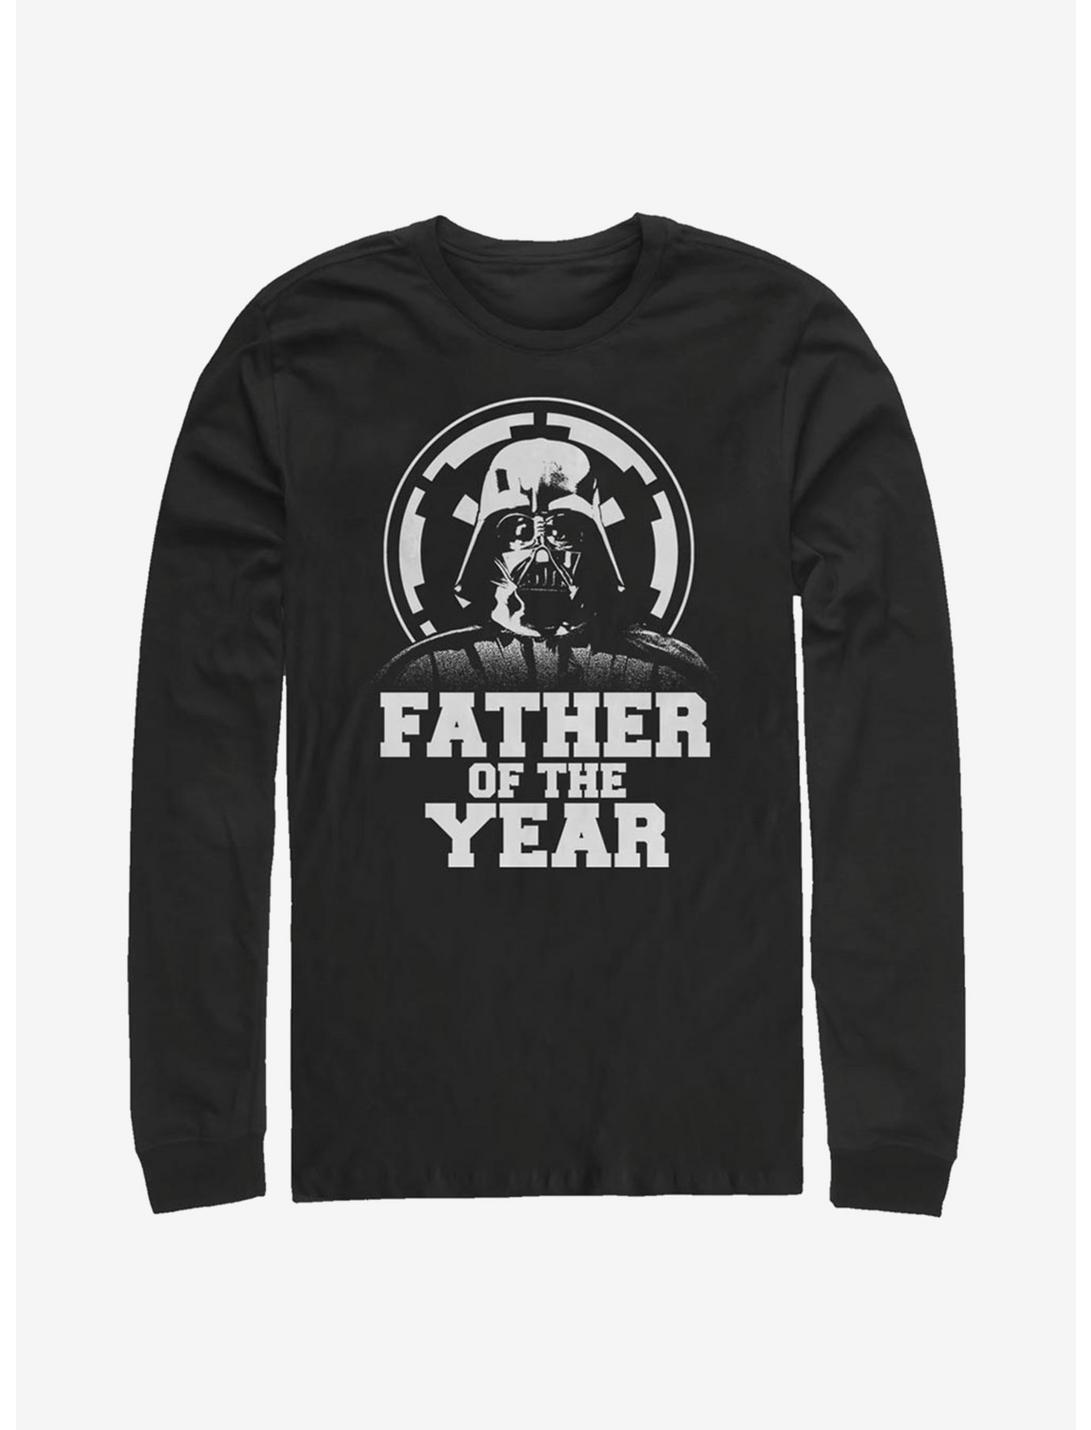 Star Wars Lord Father Long-Sleeve T-Shirt, BLACK, hi-res